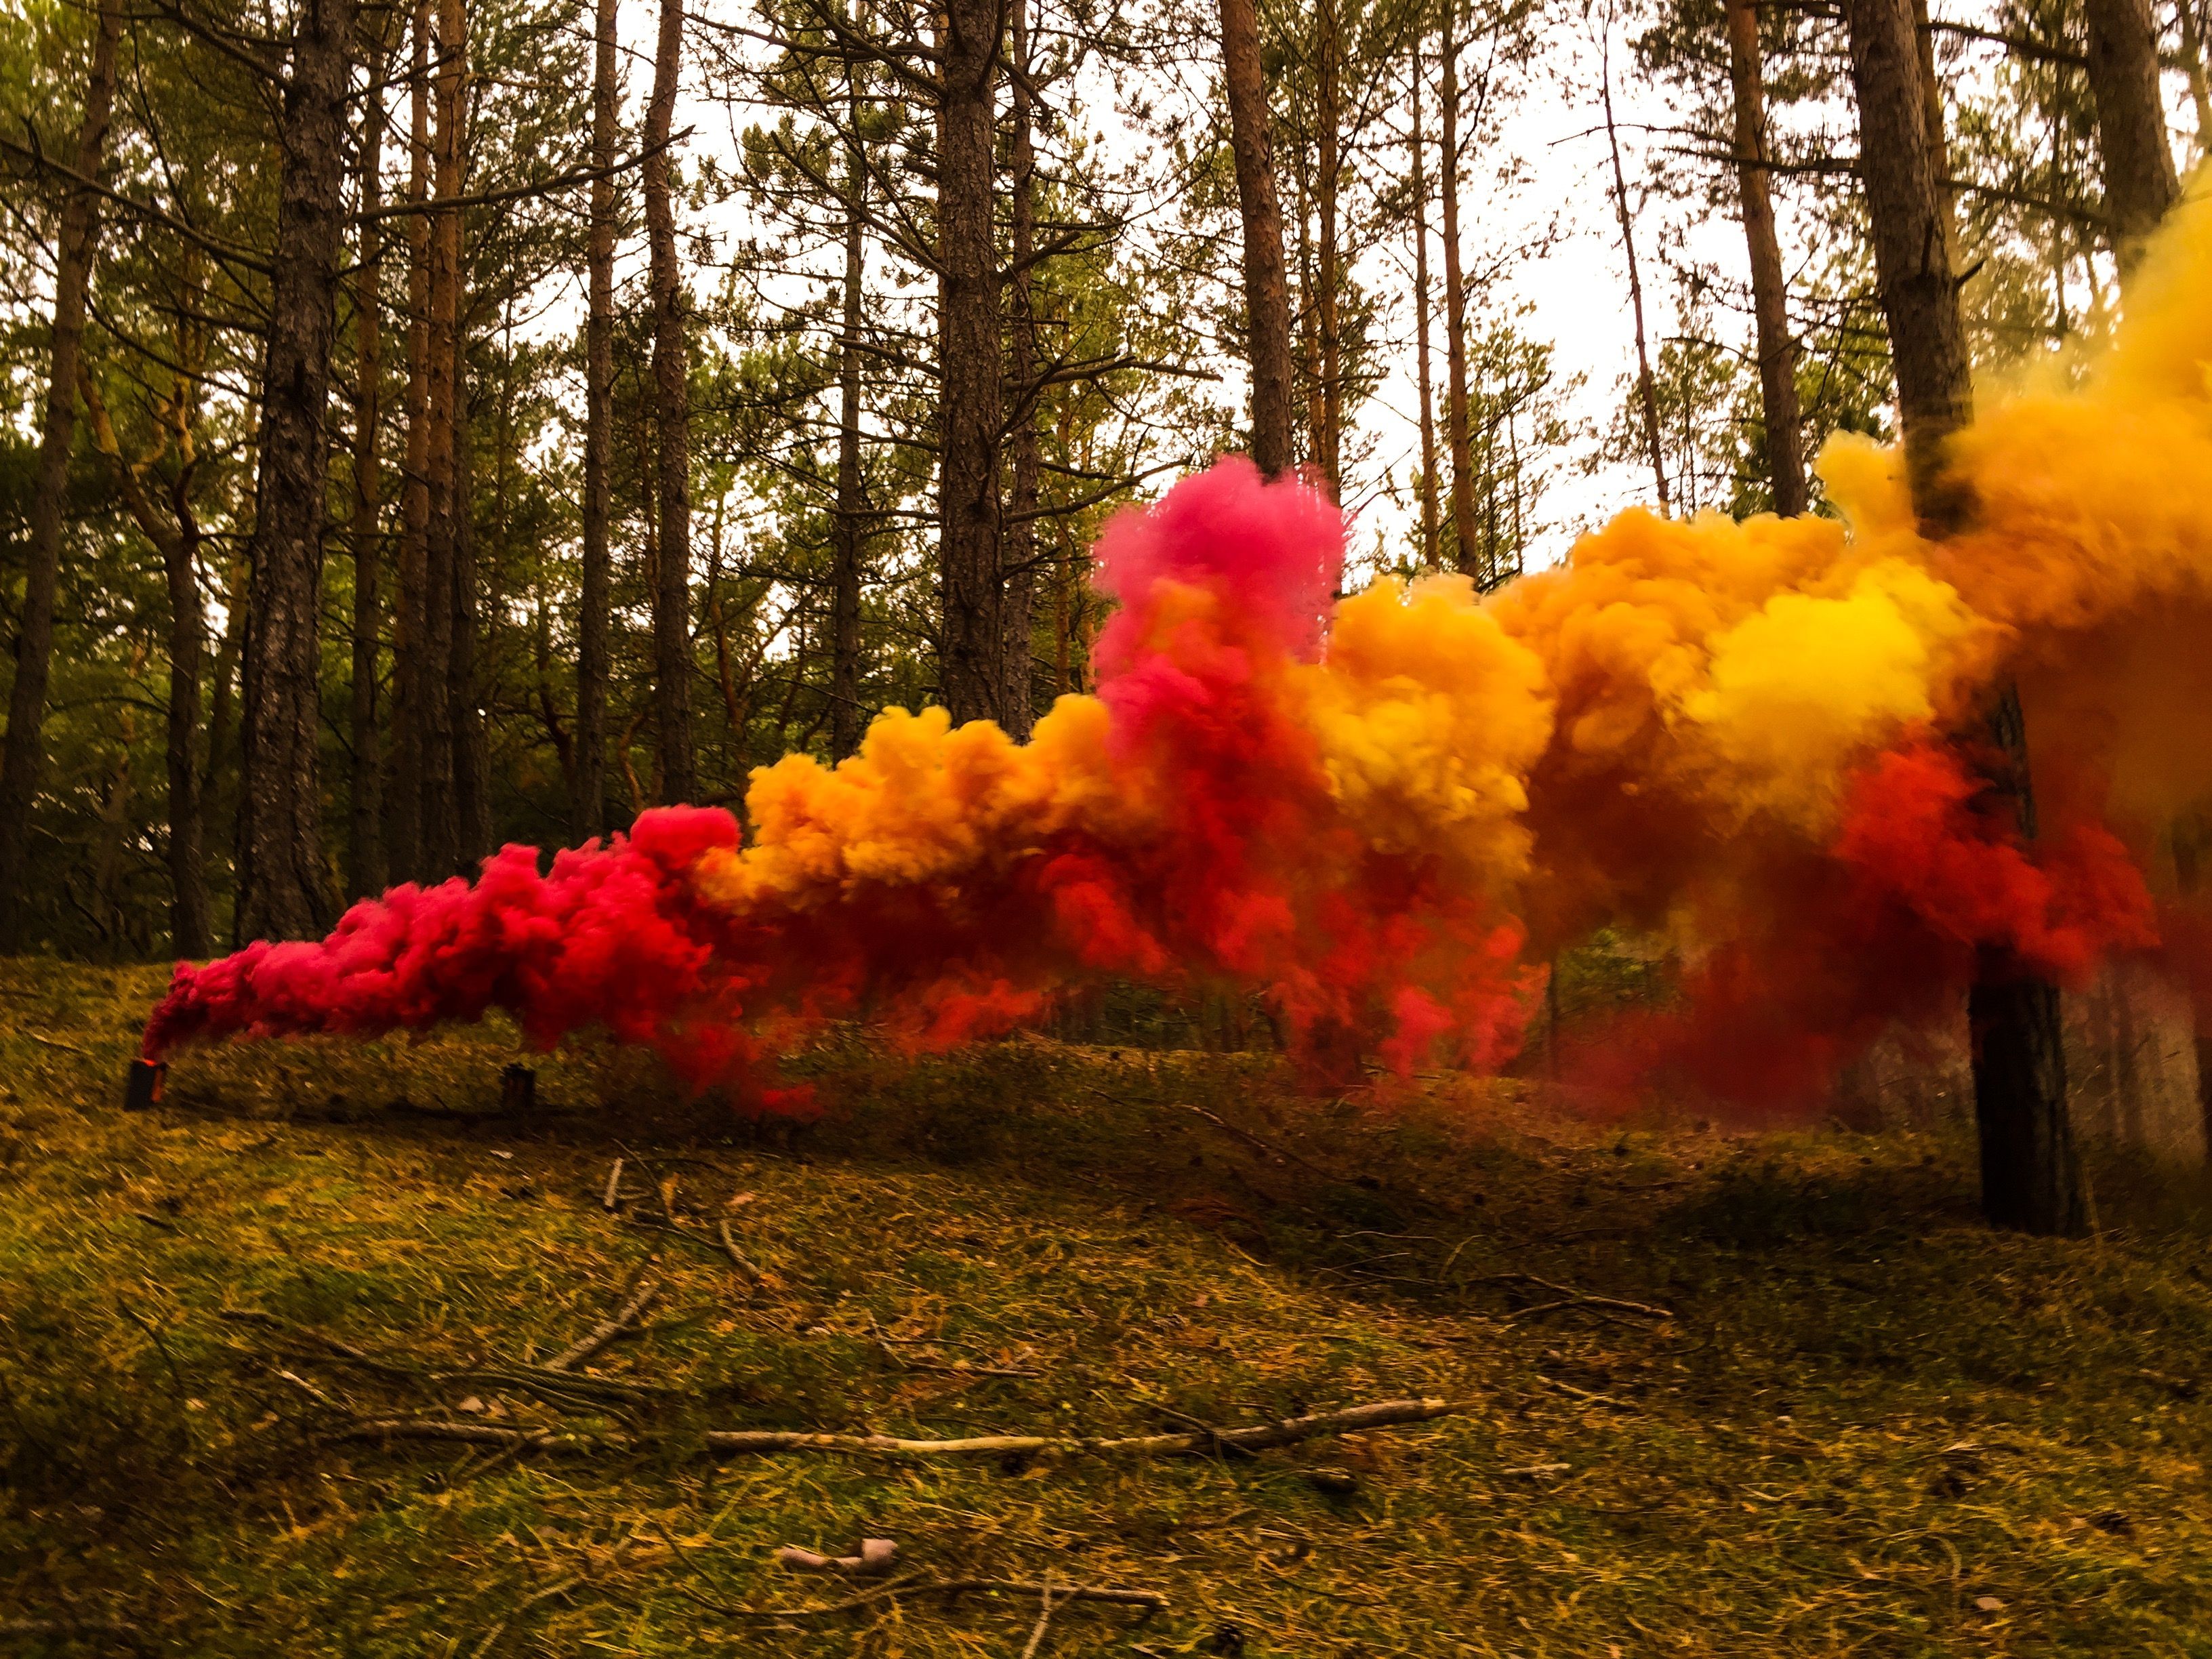 How to Make the Ultimate Colored Smoke Bomb